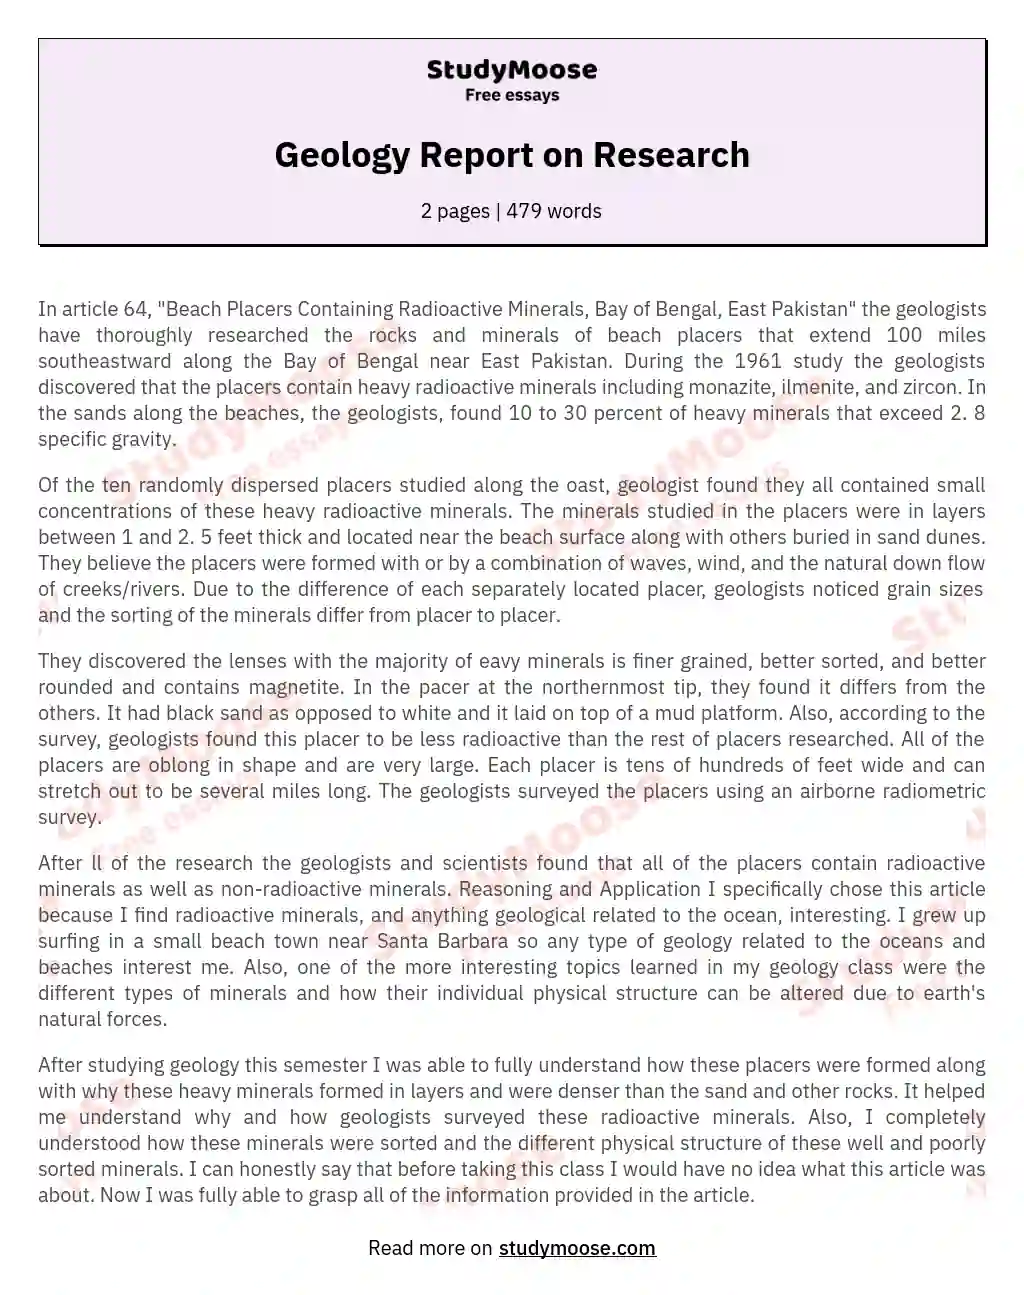 Geology Report on Research